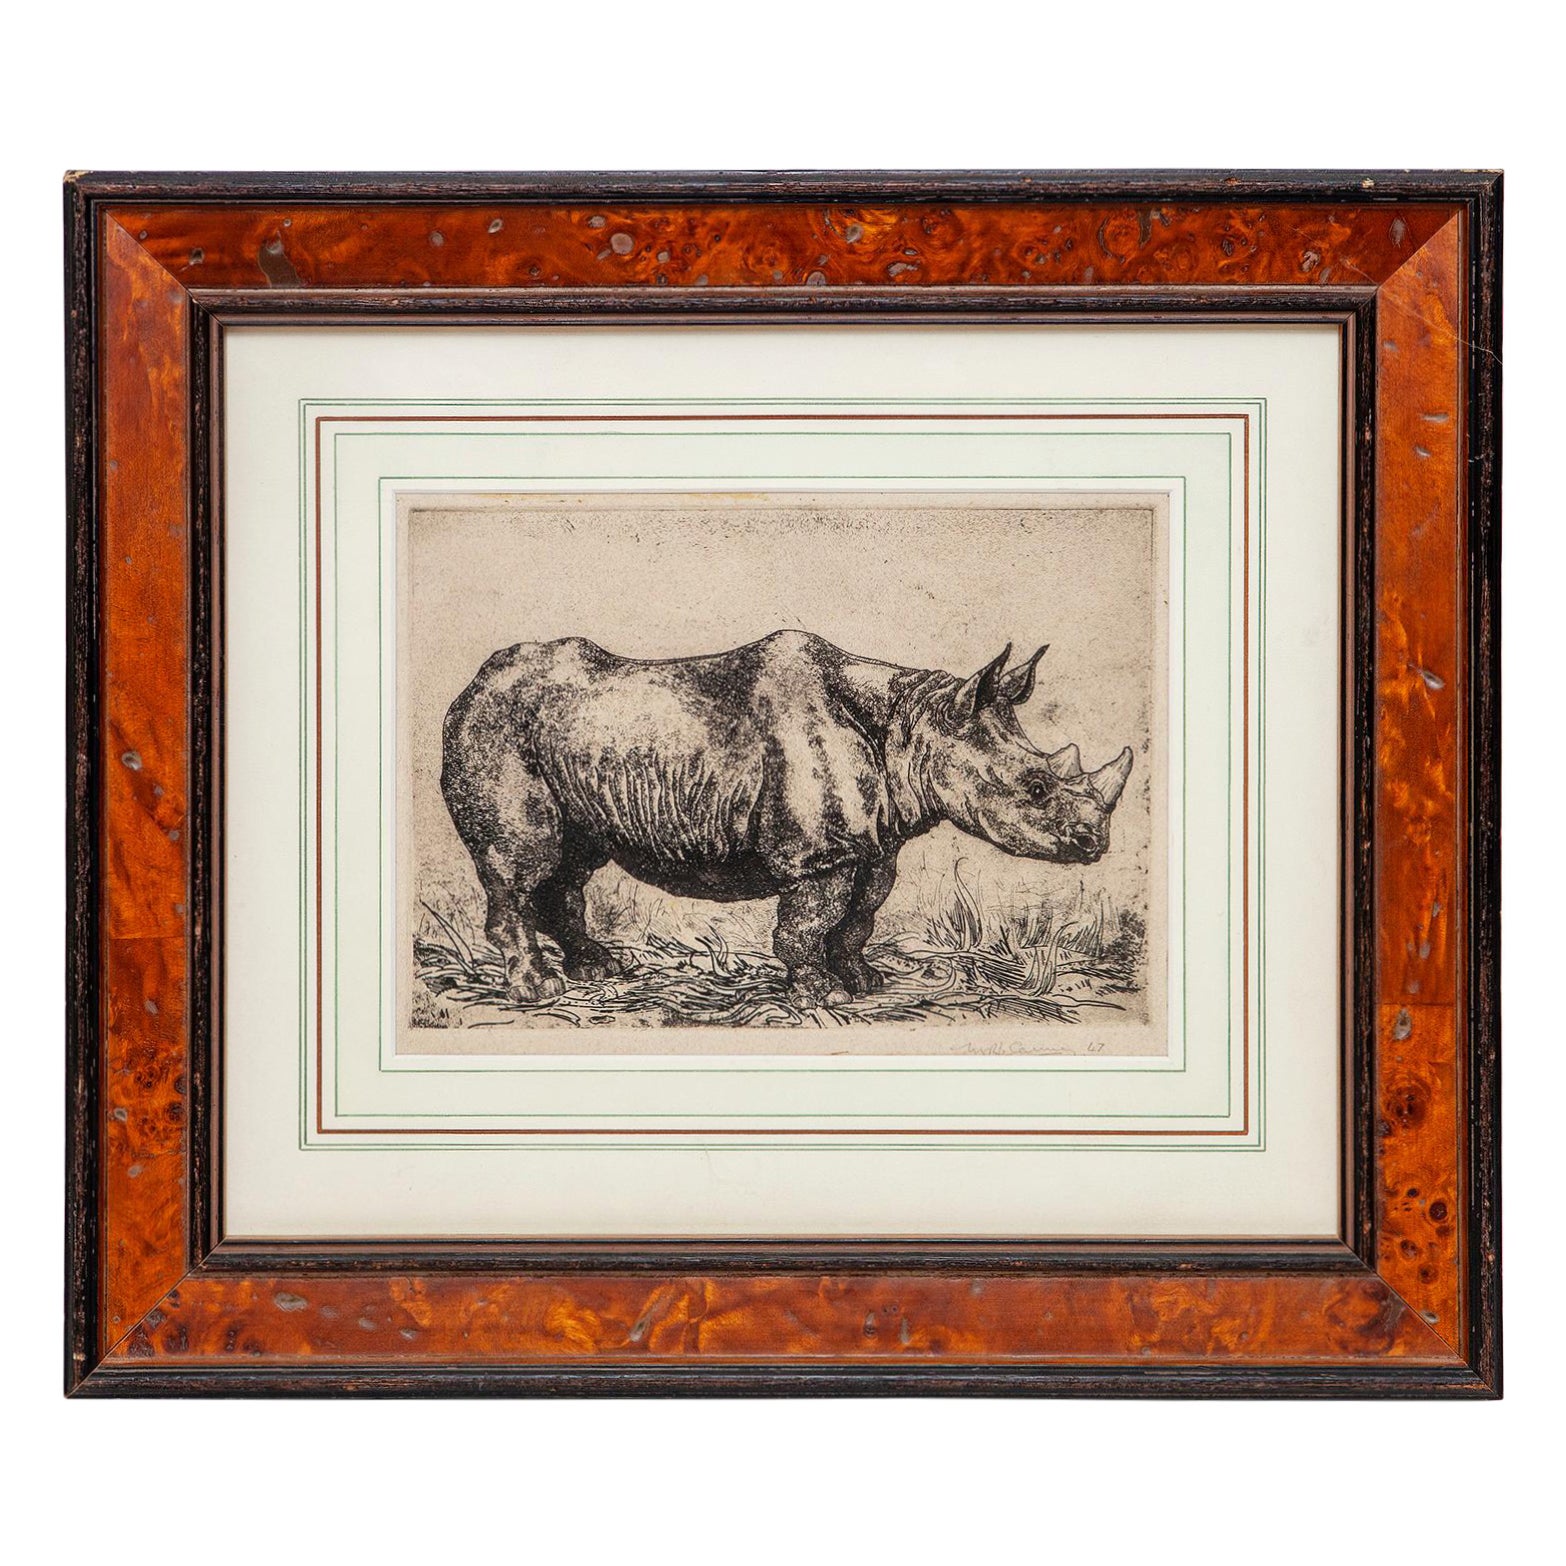 Michael Canney Rhinoceros Etching Signed Dated 1947 Aft Durer's 1515 Woodcut For Sale